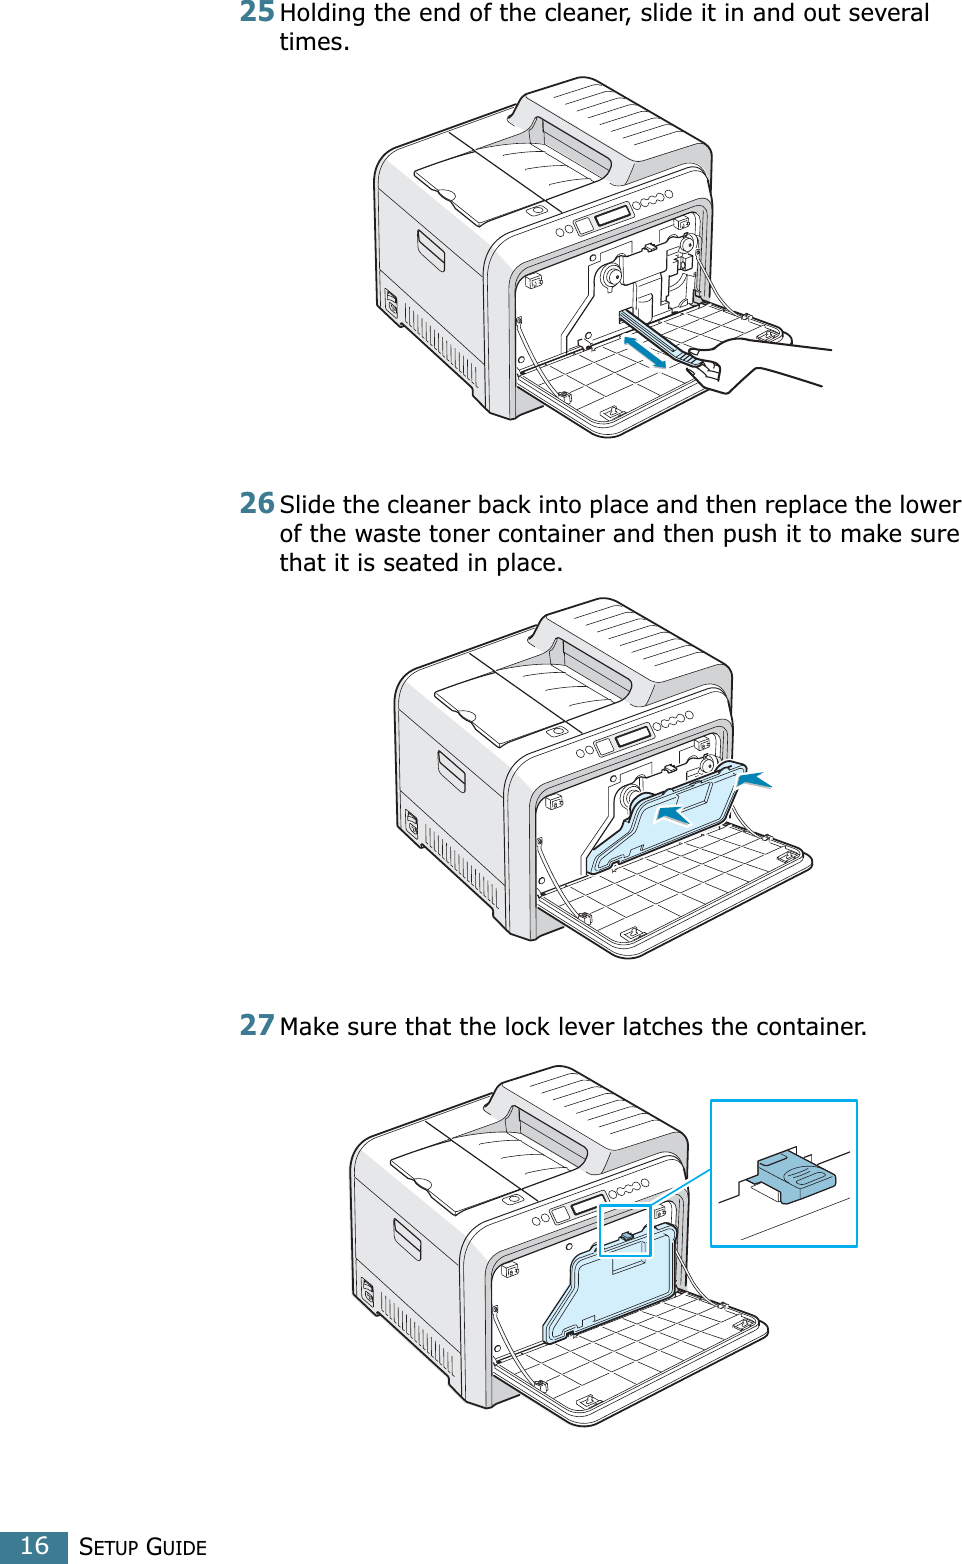 SETUP GUIDE1625Holding the end of the cleaner, slide it in and out several times.26Slide the cleaner back into place and then replace the lower of the waste toner container and then push it to make sure that it is seated in place.27Make sure that the lock lever latches the container. 